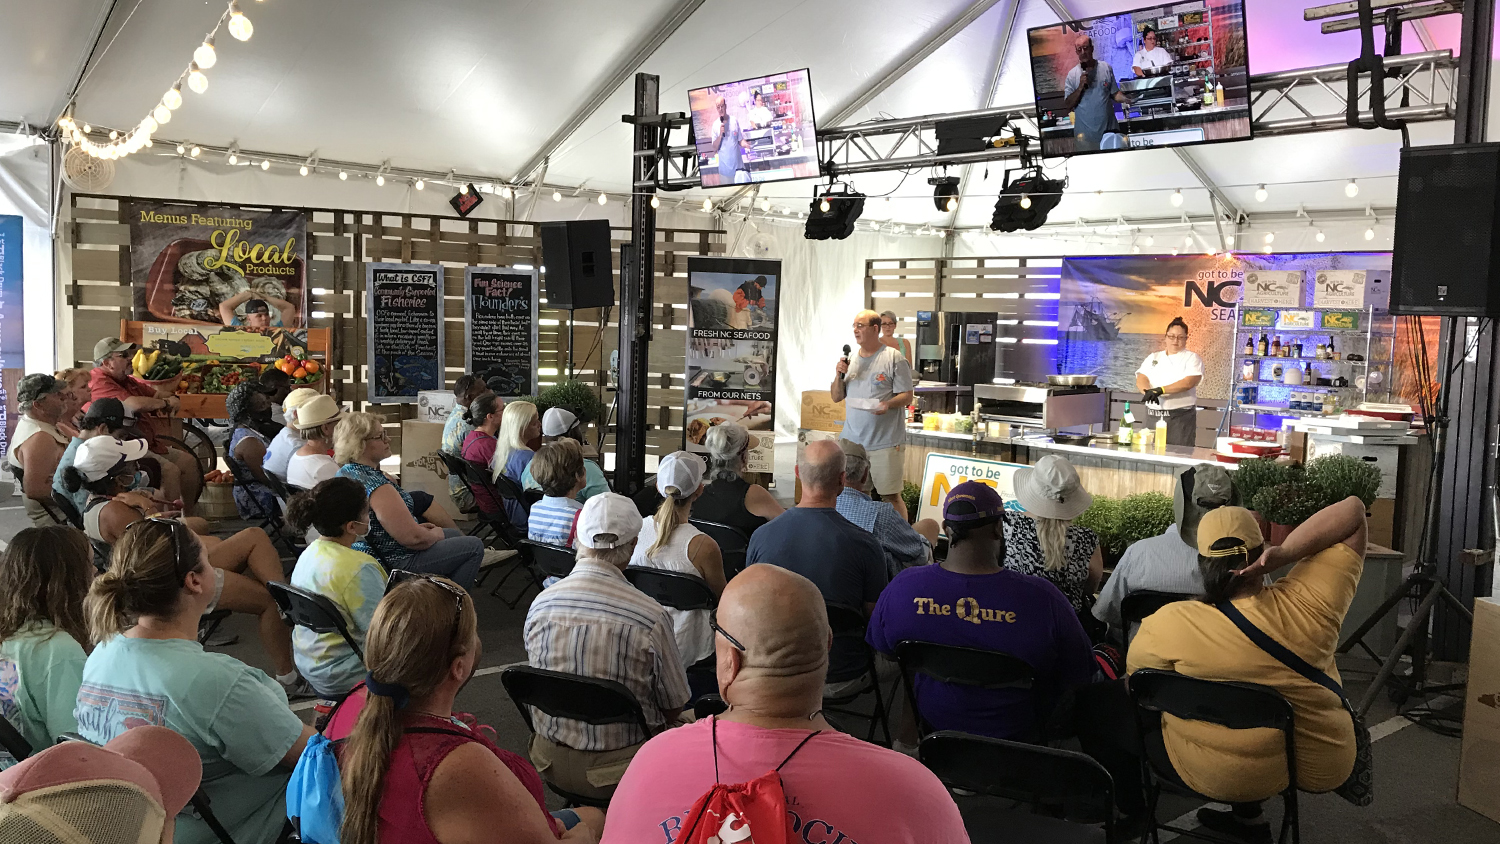 Barry Nash gives a presentation on striped bass to a large seated crowd at the NC Seafood Festival